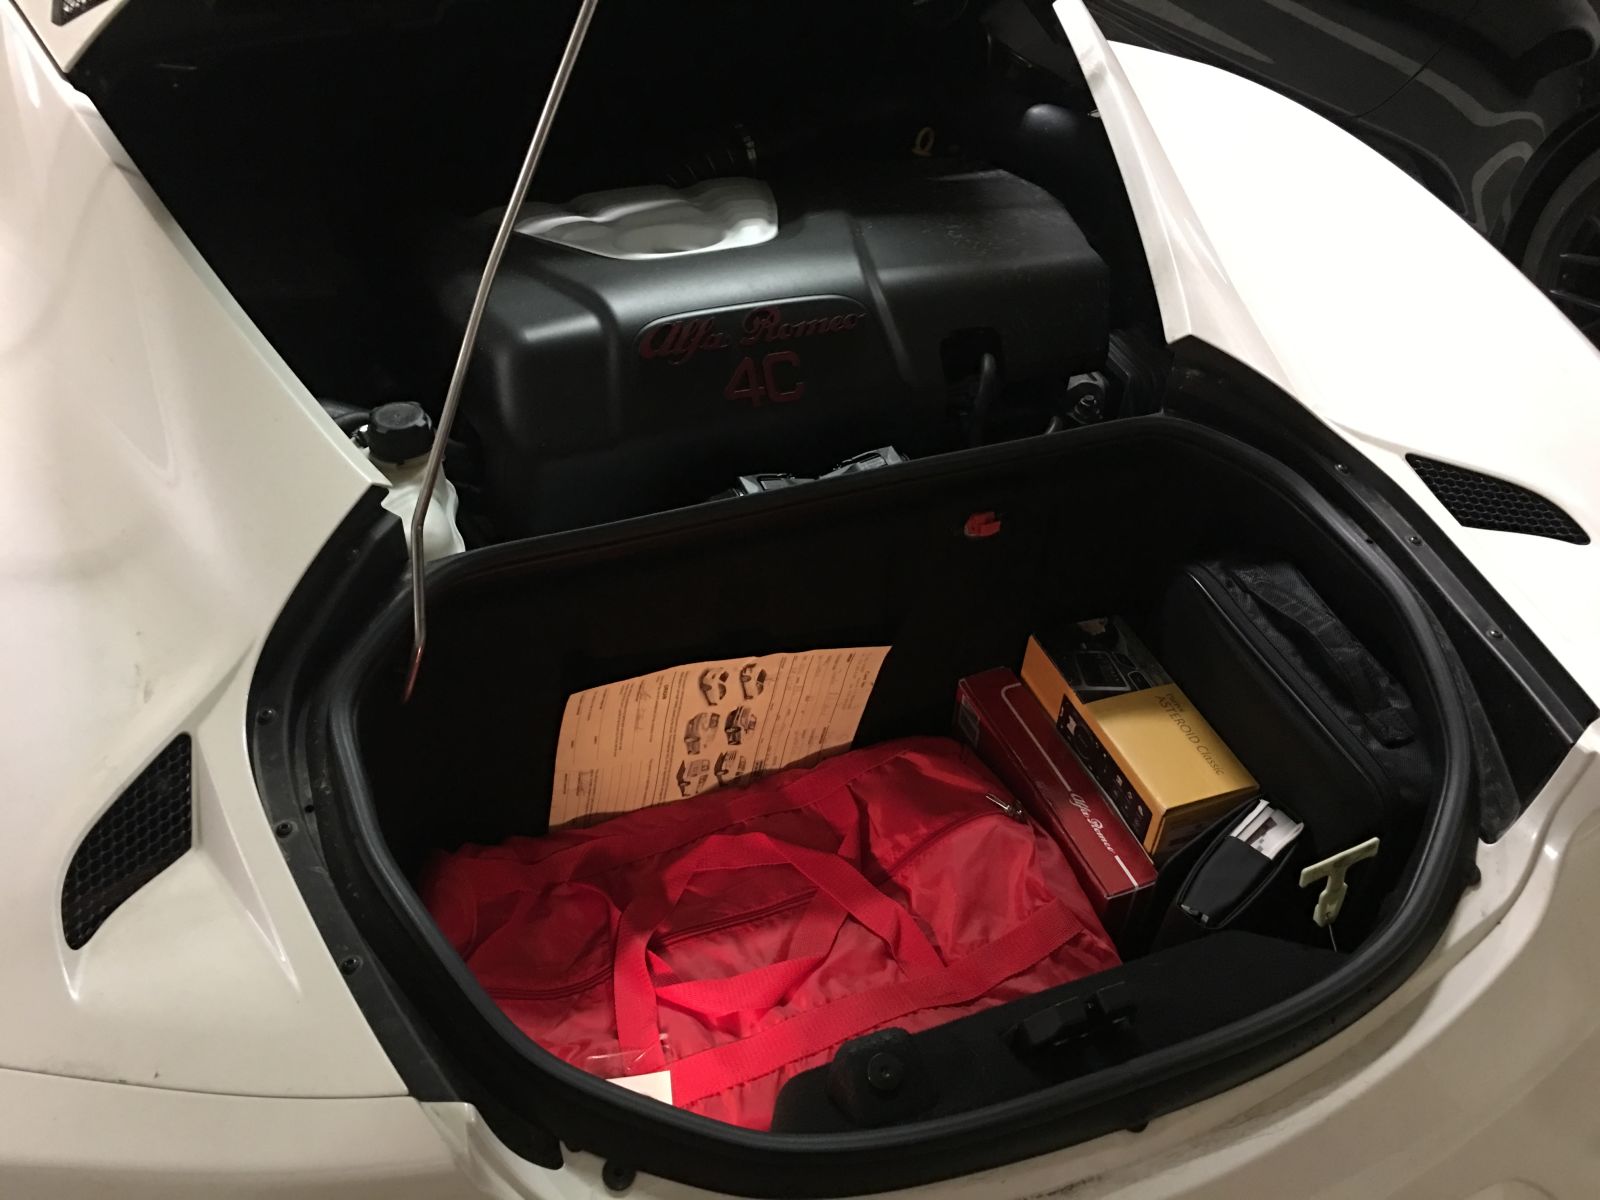 We all know the rear luggage boot is tiny, on the order of 3.5 cu ft. Here are all of the materials that came with the car when it was new. In the Spider version, this would be known as the roof storage bin because it wouldn’t be able to fit anything else.